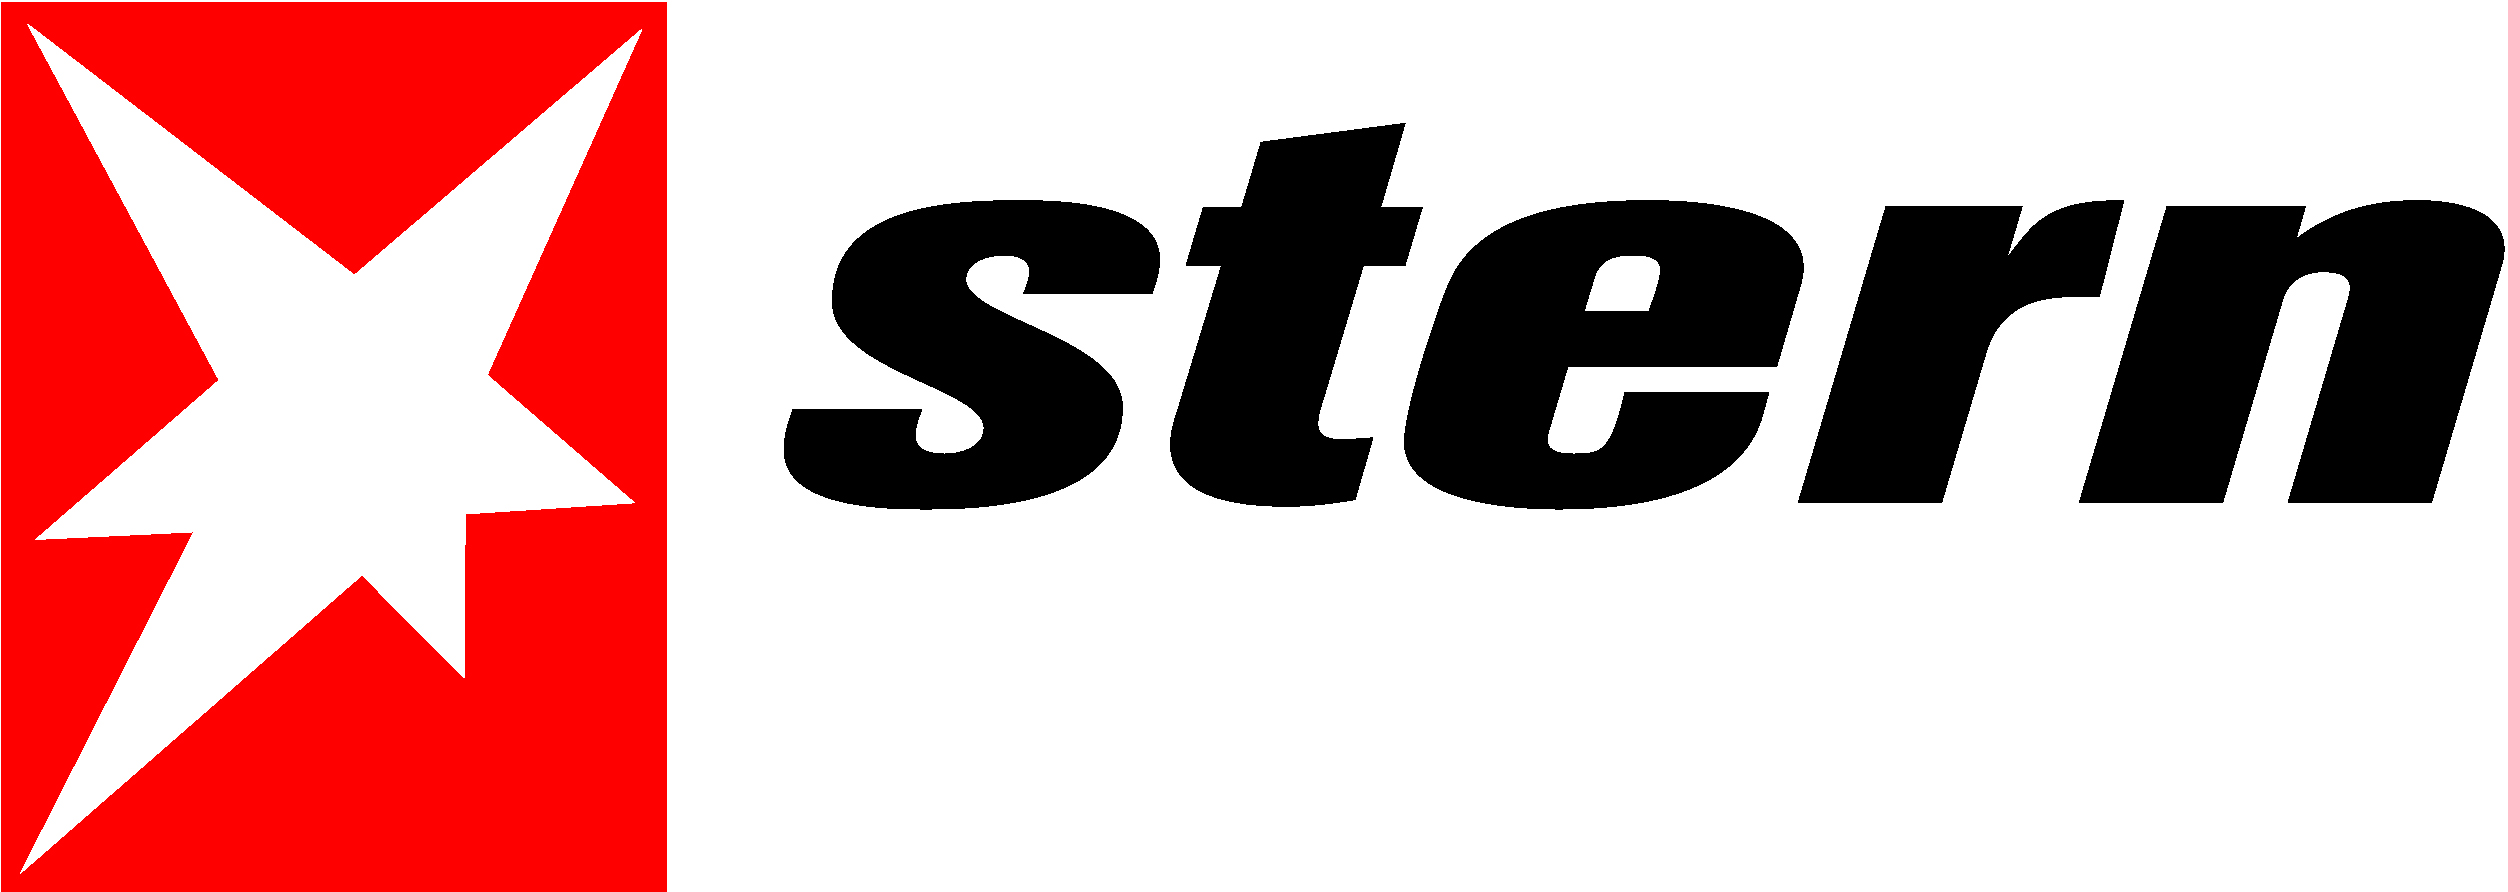 Logo of Piquee's client Stern